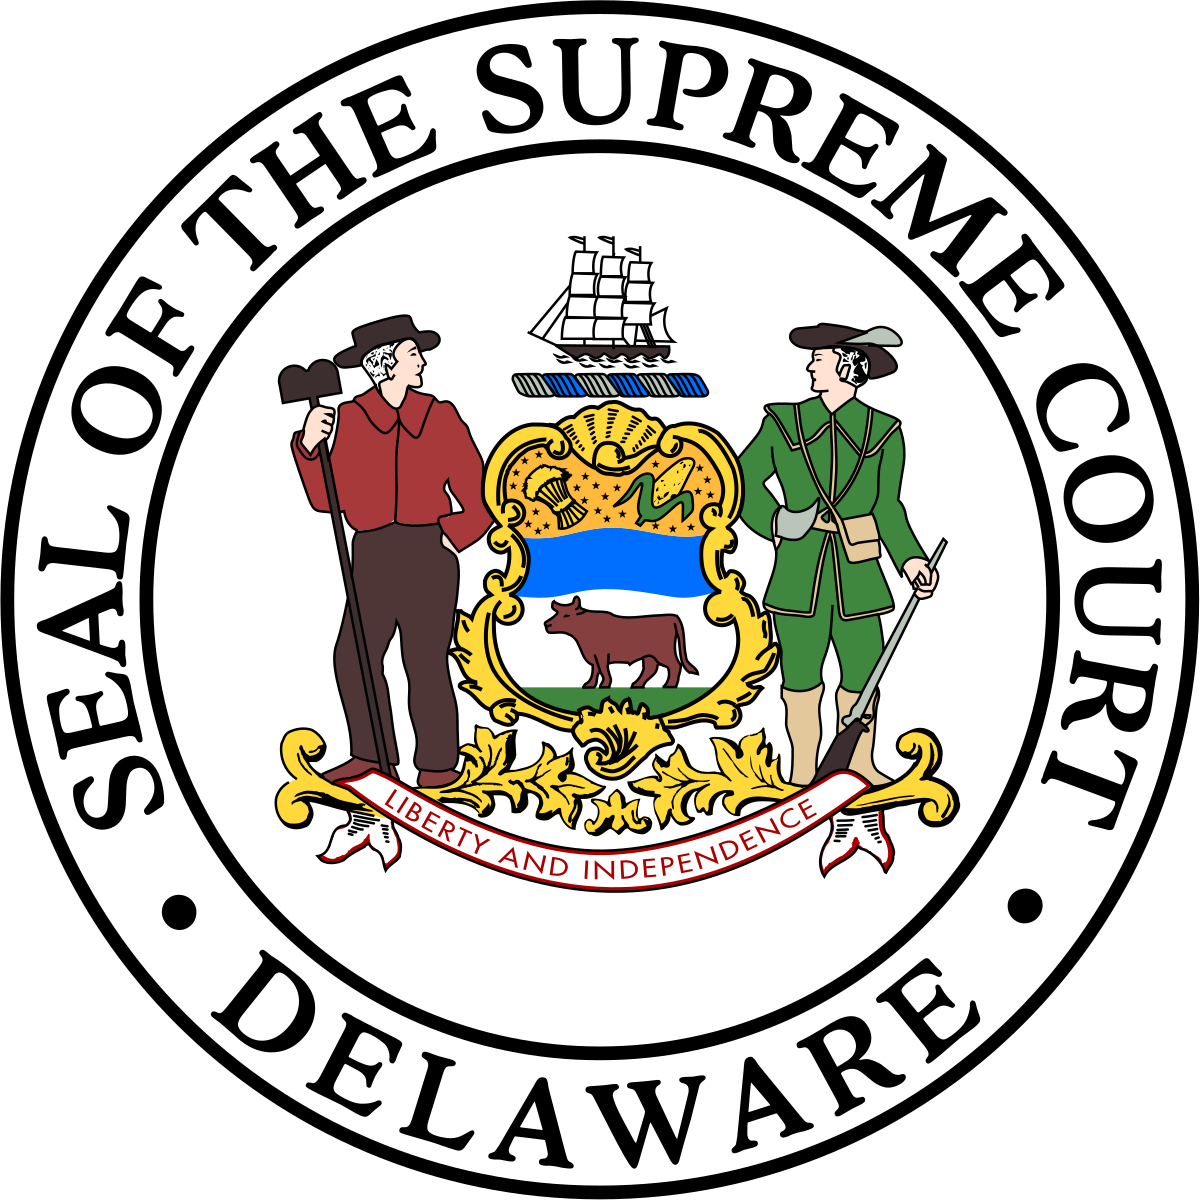 Supreme drawing at getdrawings. Justice clipart appellate court